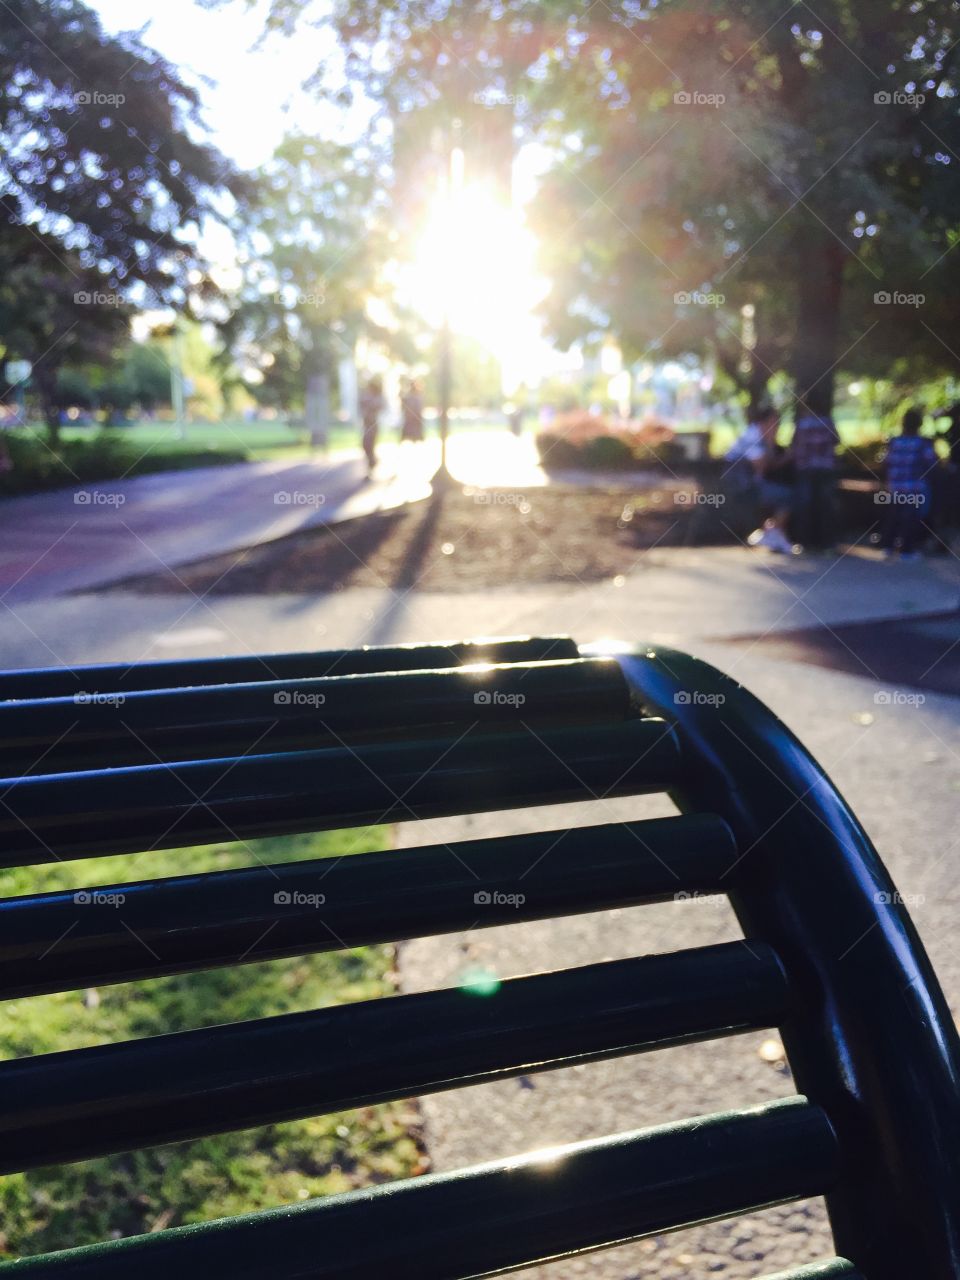 Park bench . Evening time click from park bench in Atlanta 